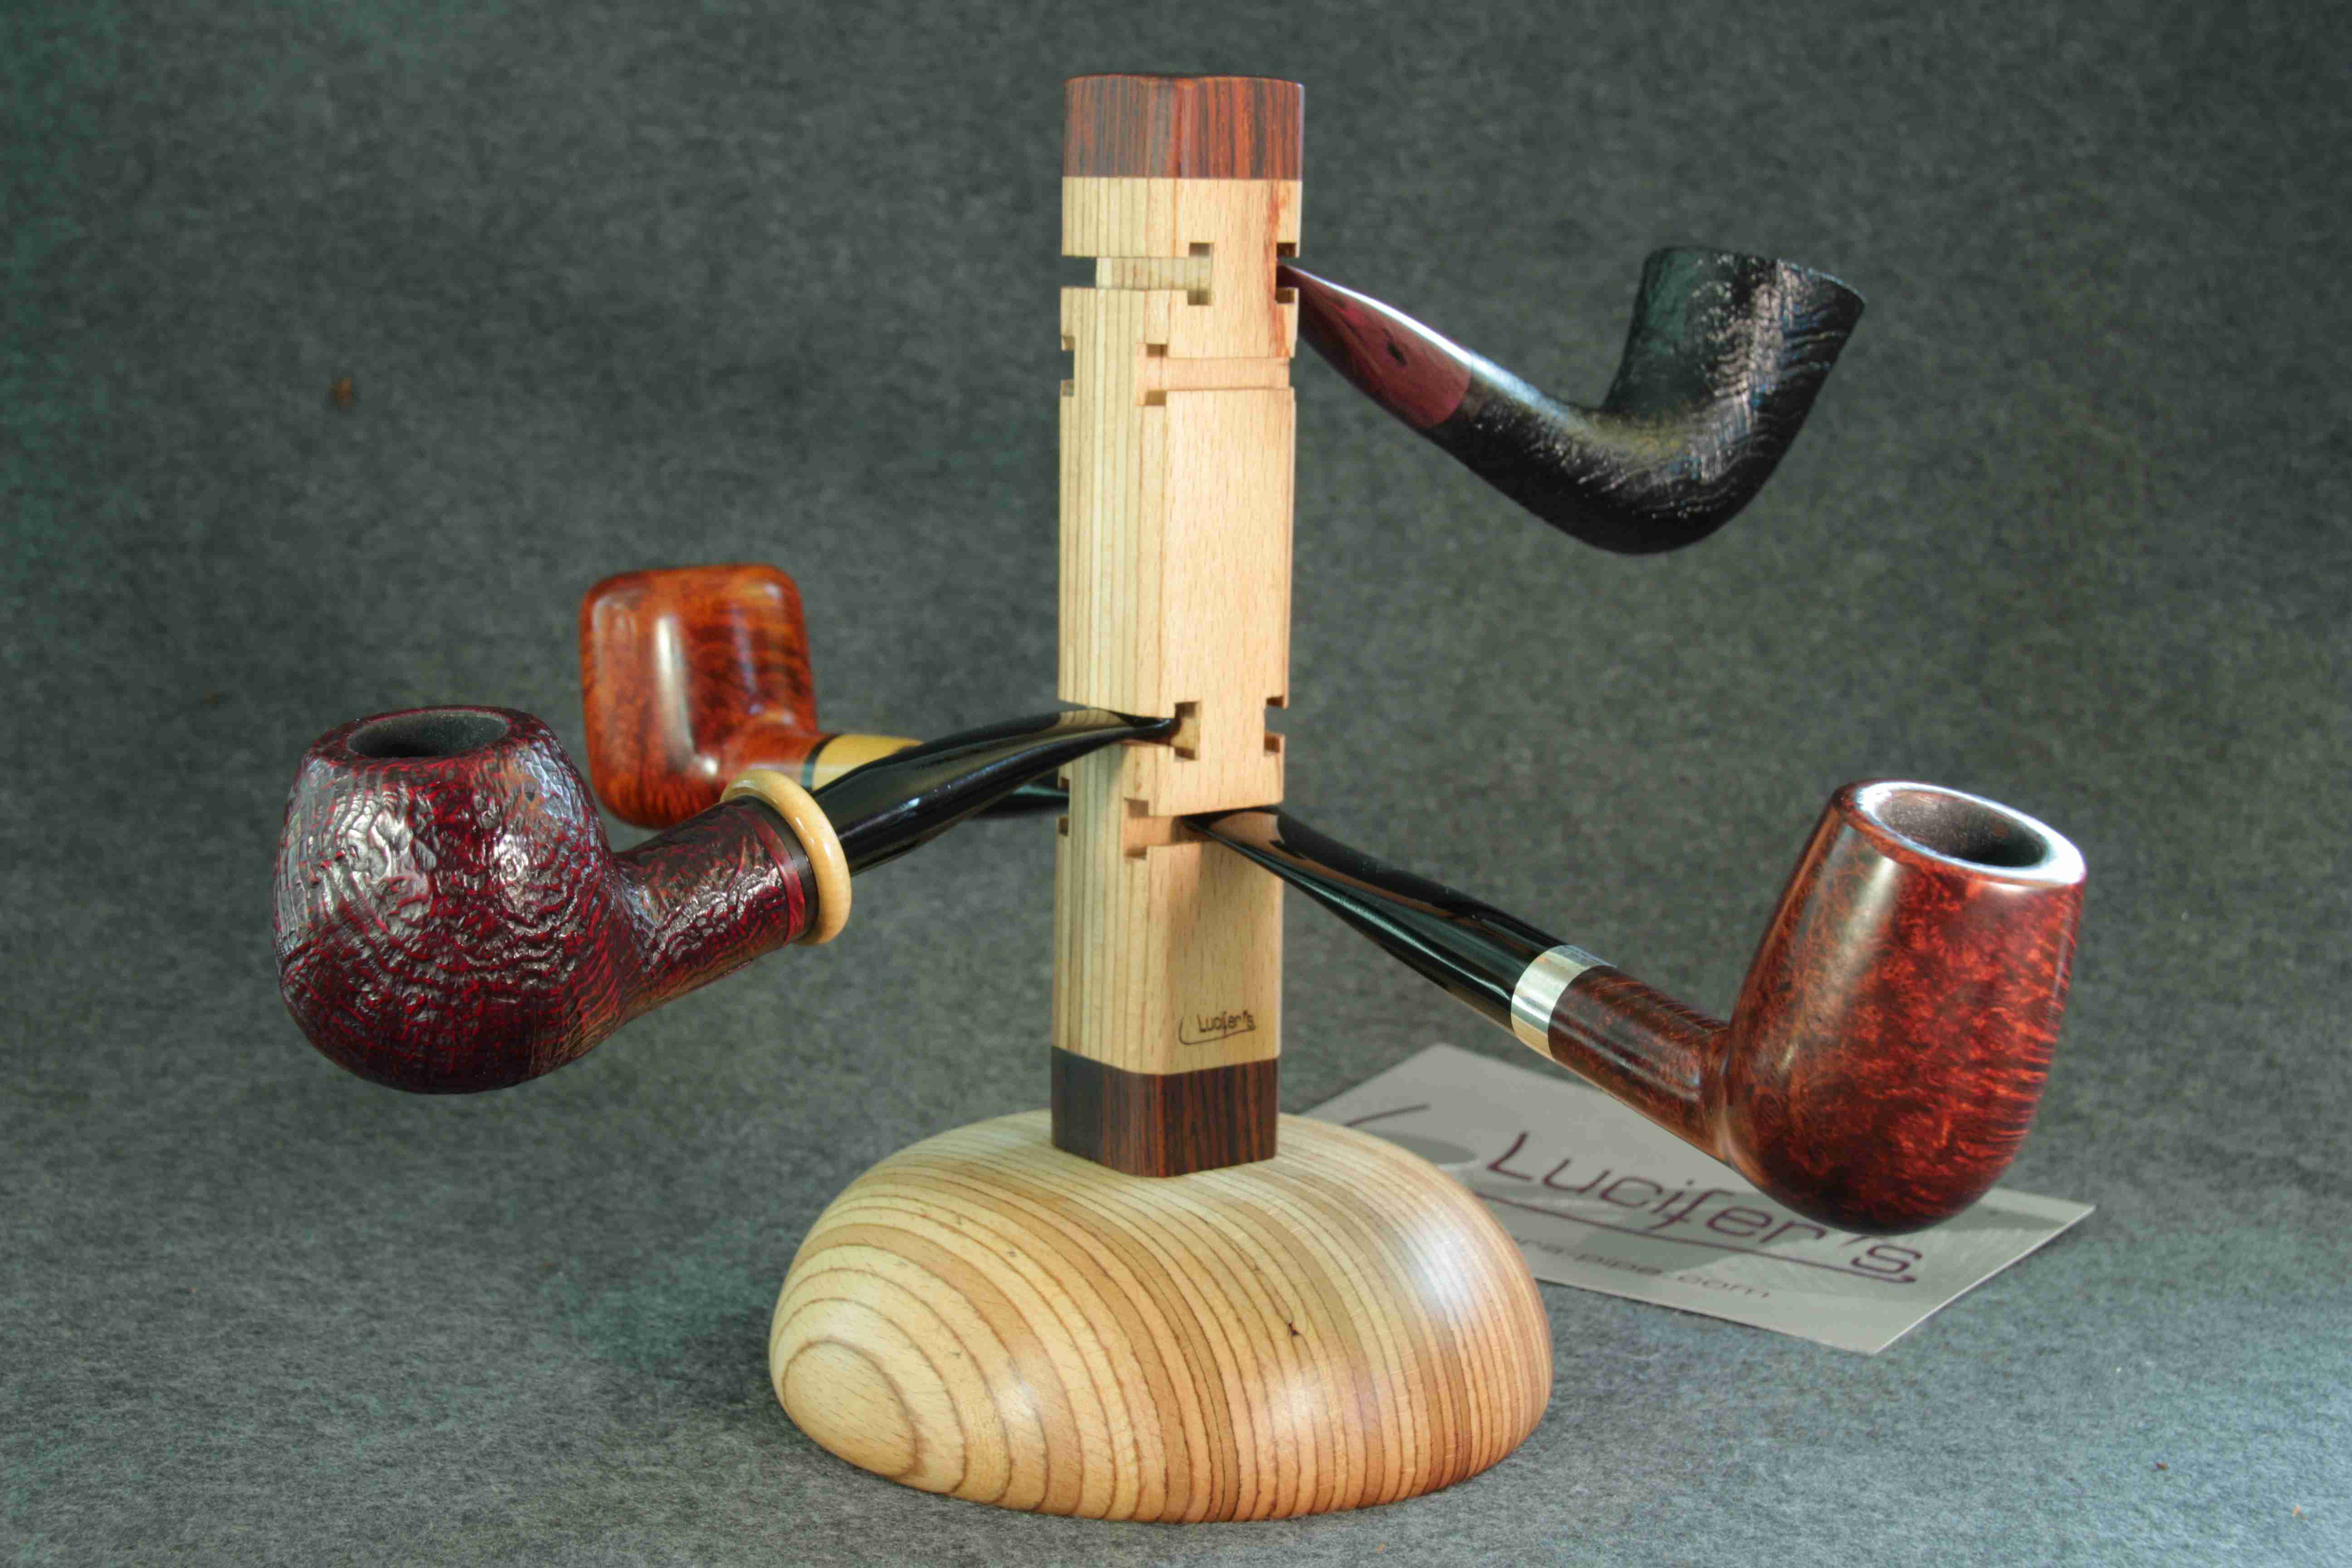 http://www.lucifers-pipe.com/images/product_images/original_images/St%C3%A4nder02-2.JPG